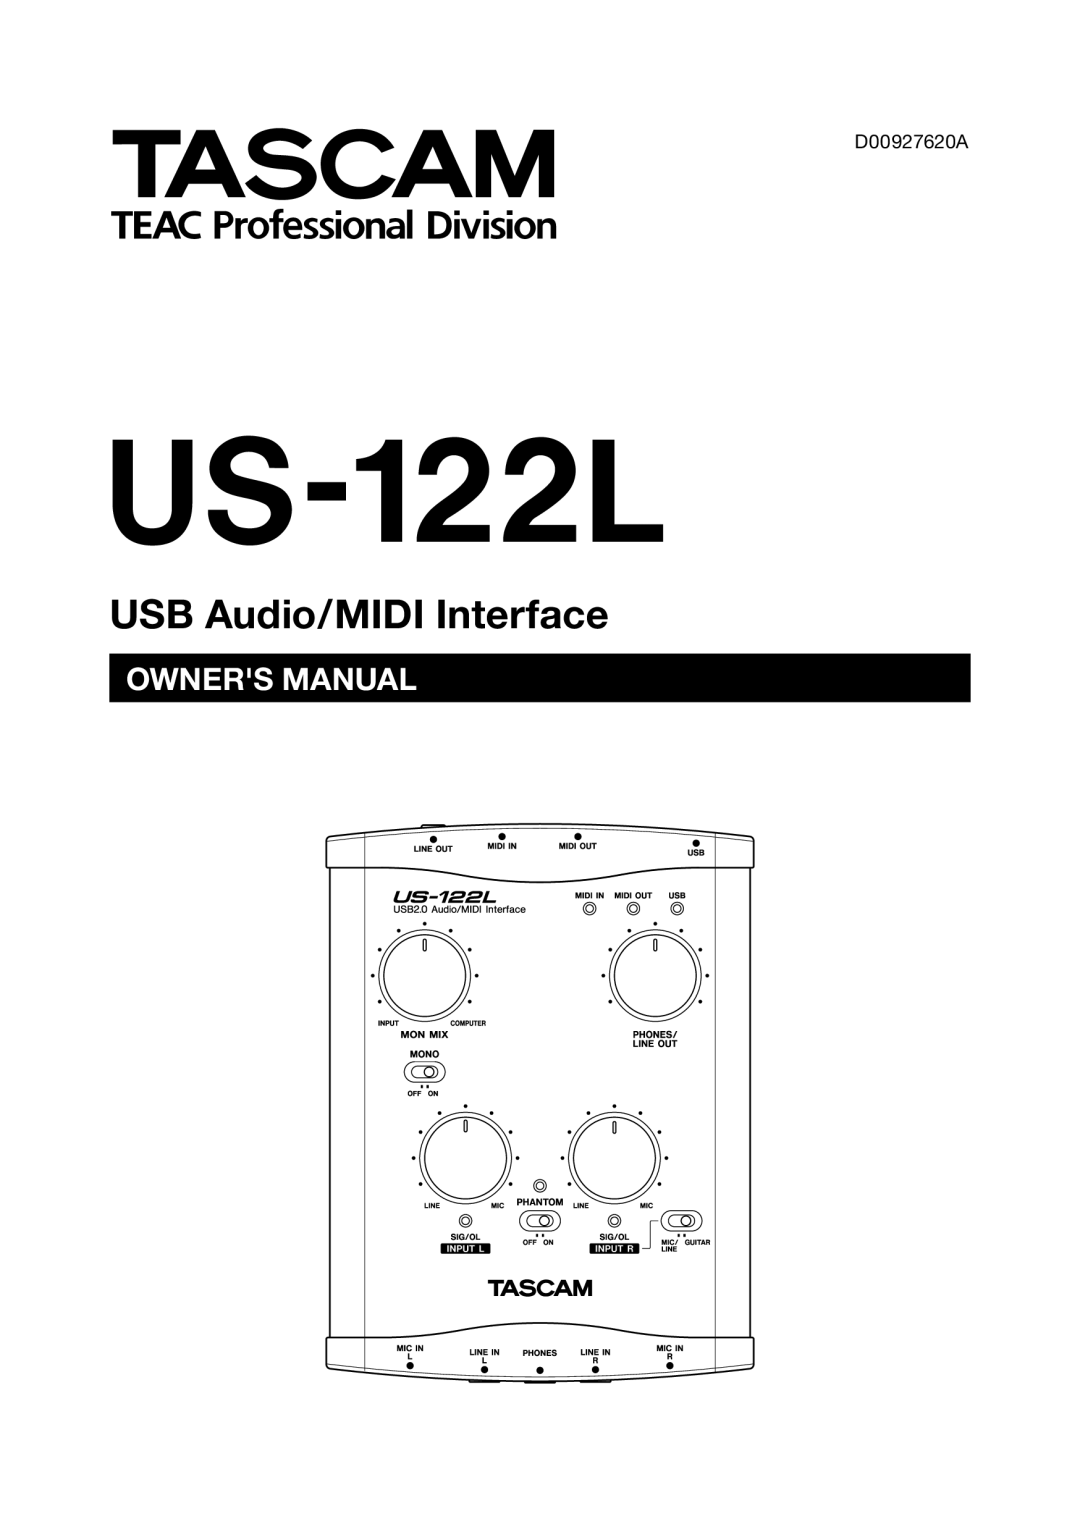 Tascam US-122L owner manual USB Audio/MIDI Interface, Owners Manual 